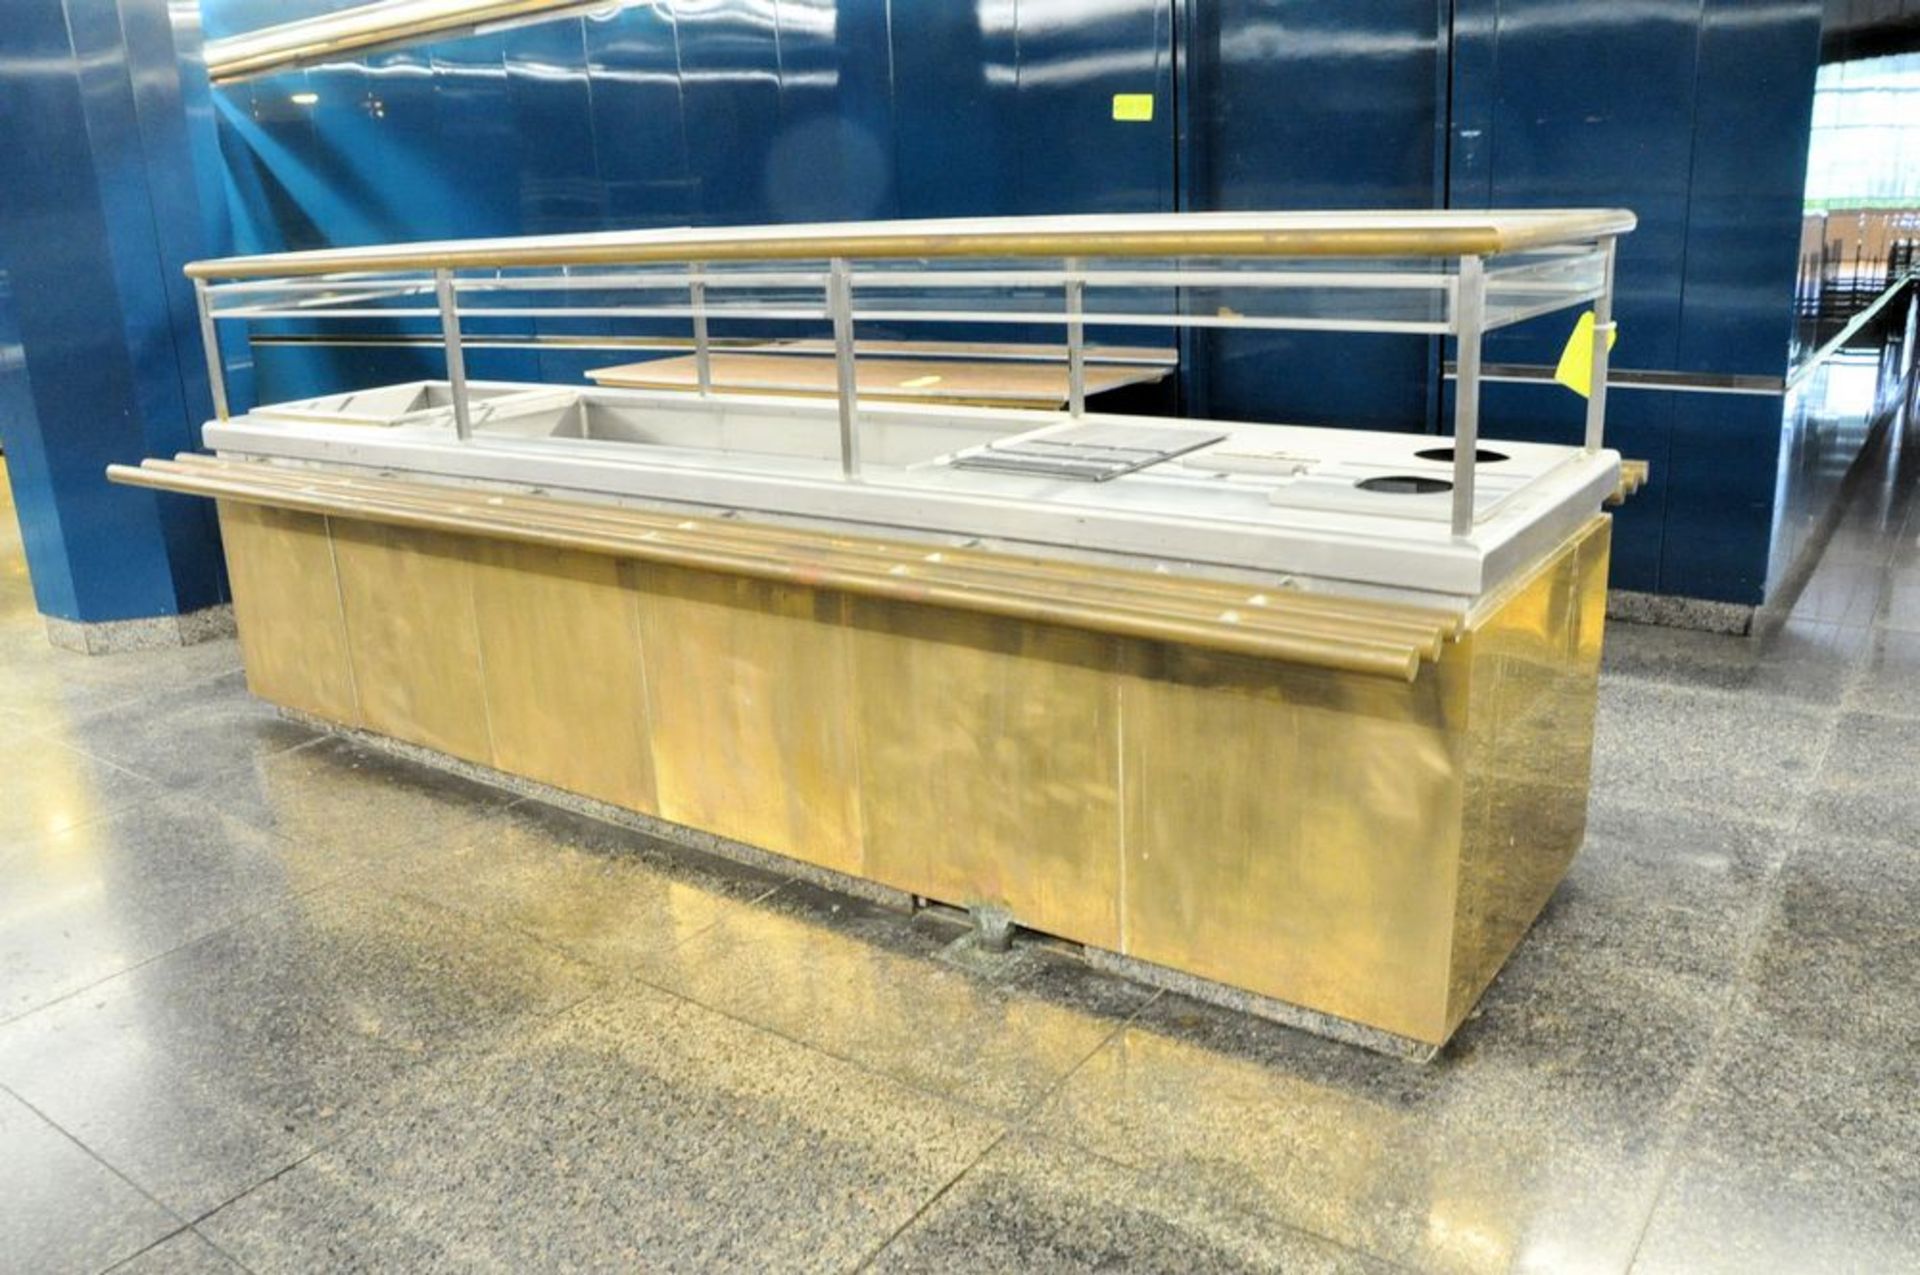 Stainless Steel Hot Foods Buffet Station, 3' x 12', Overhead Glass Sneeze Guard Hood - Image 6 of 8